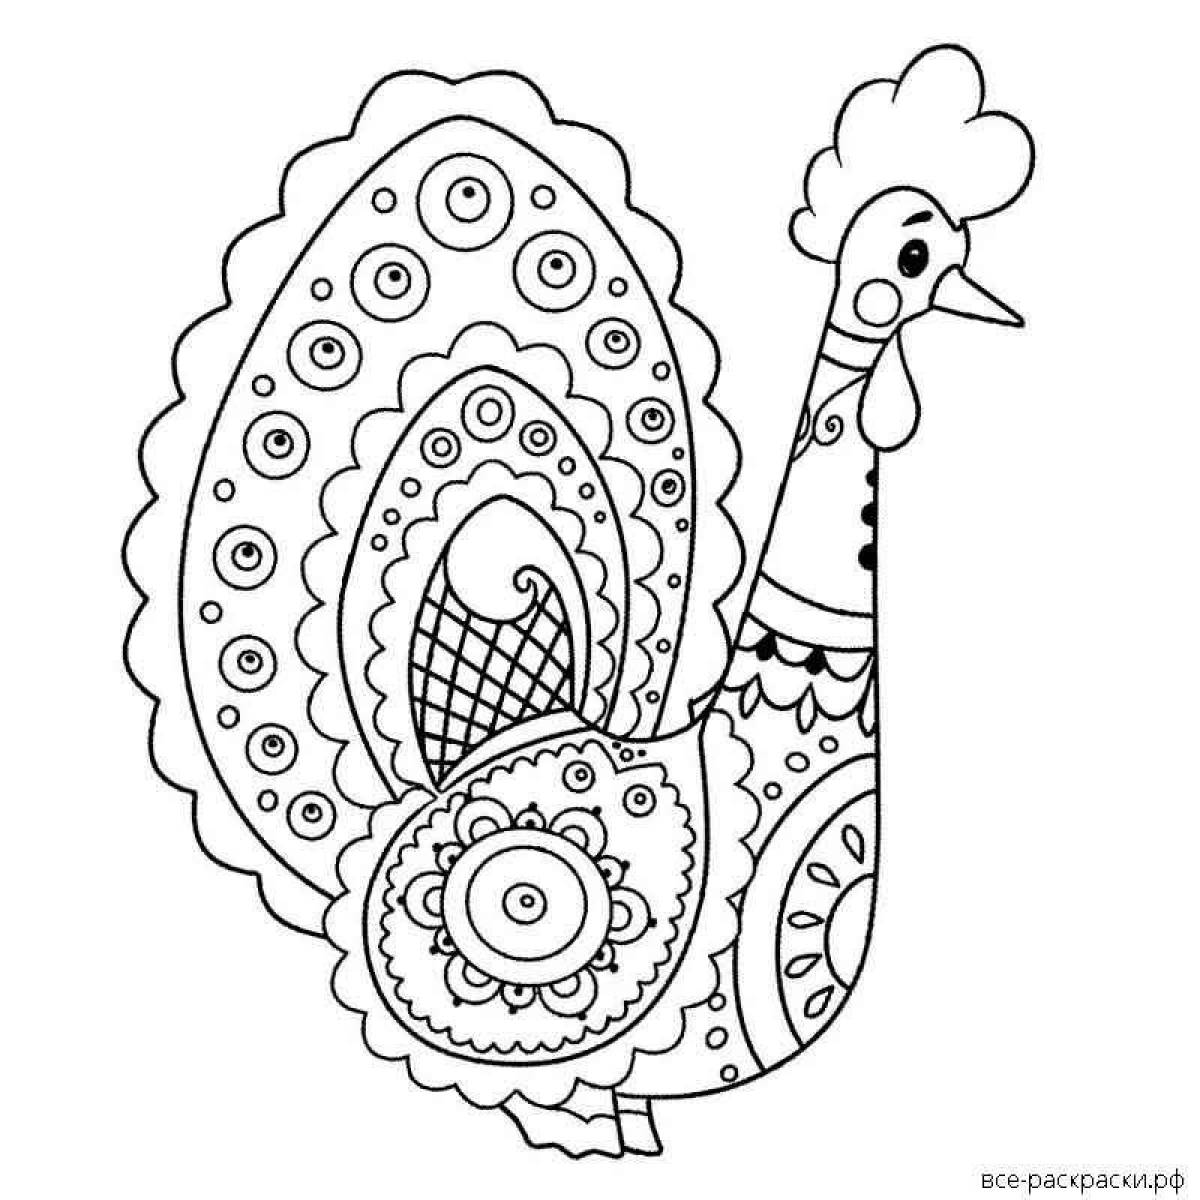 Colorful Dymkovo toy turkey coloring book